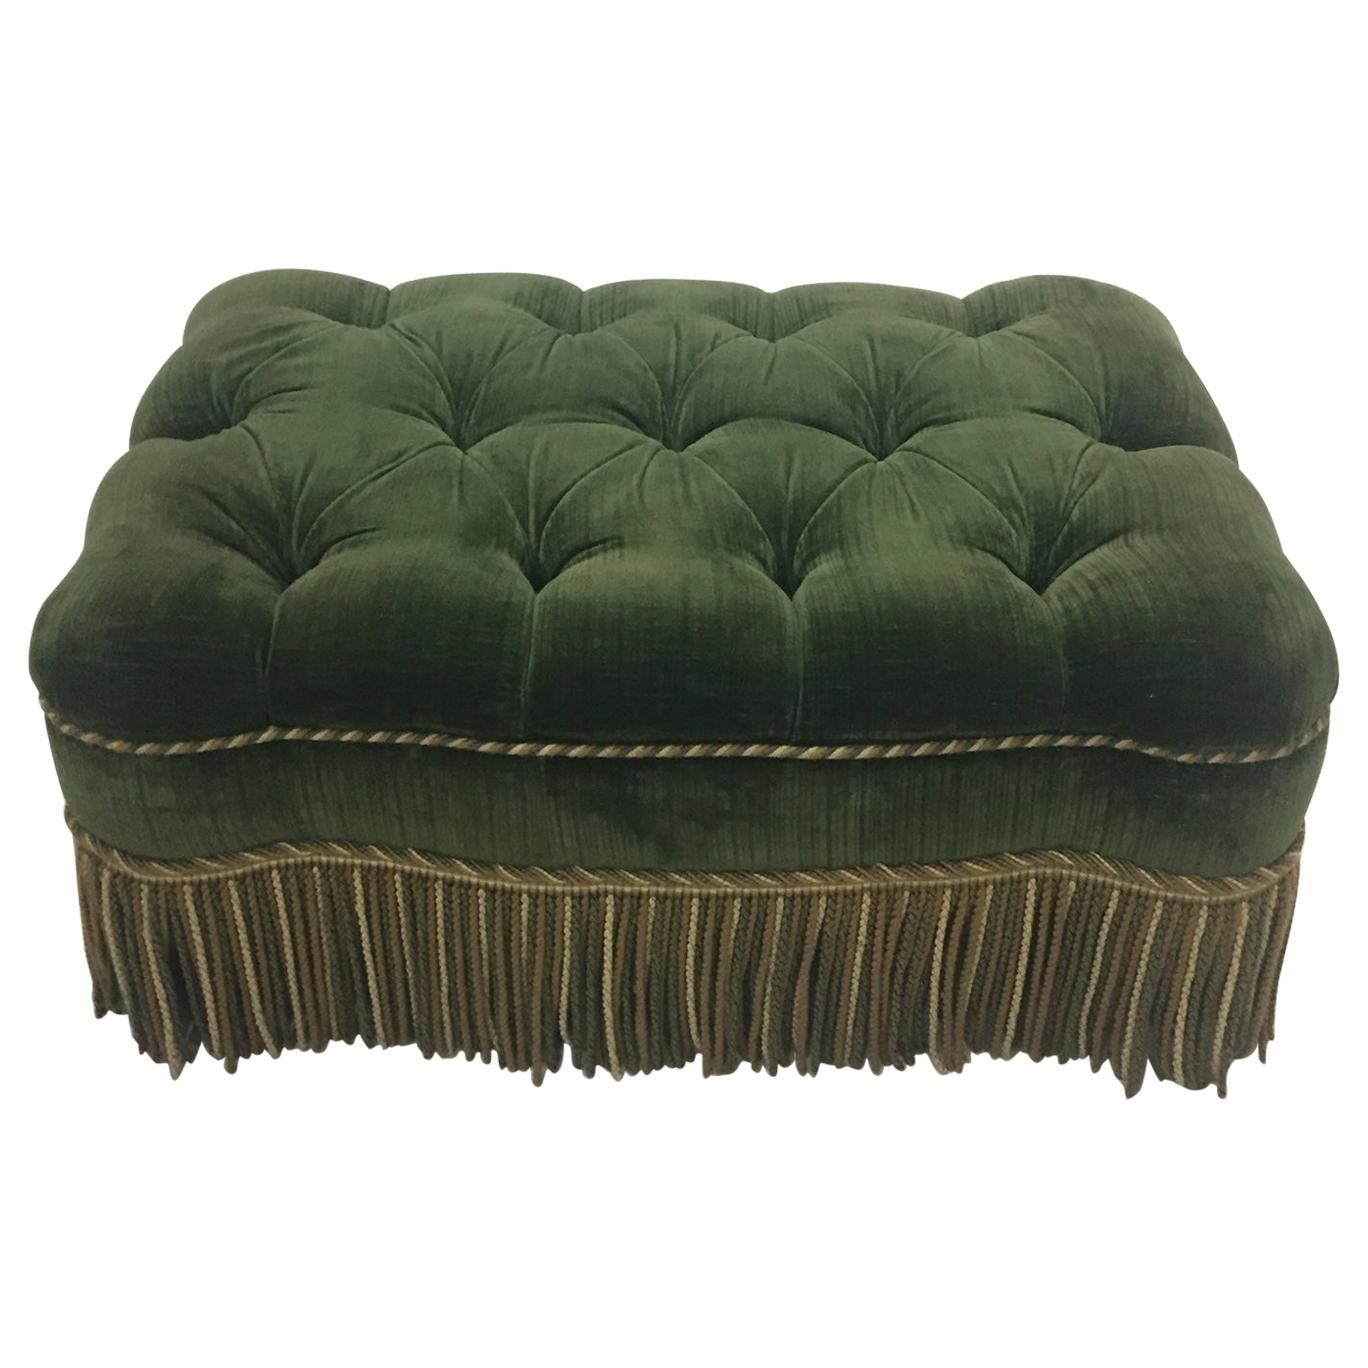 Luxurious Rectangular Green Tufted Mohair Ottoman with Fringe